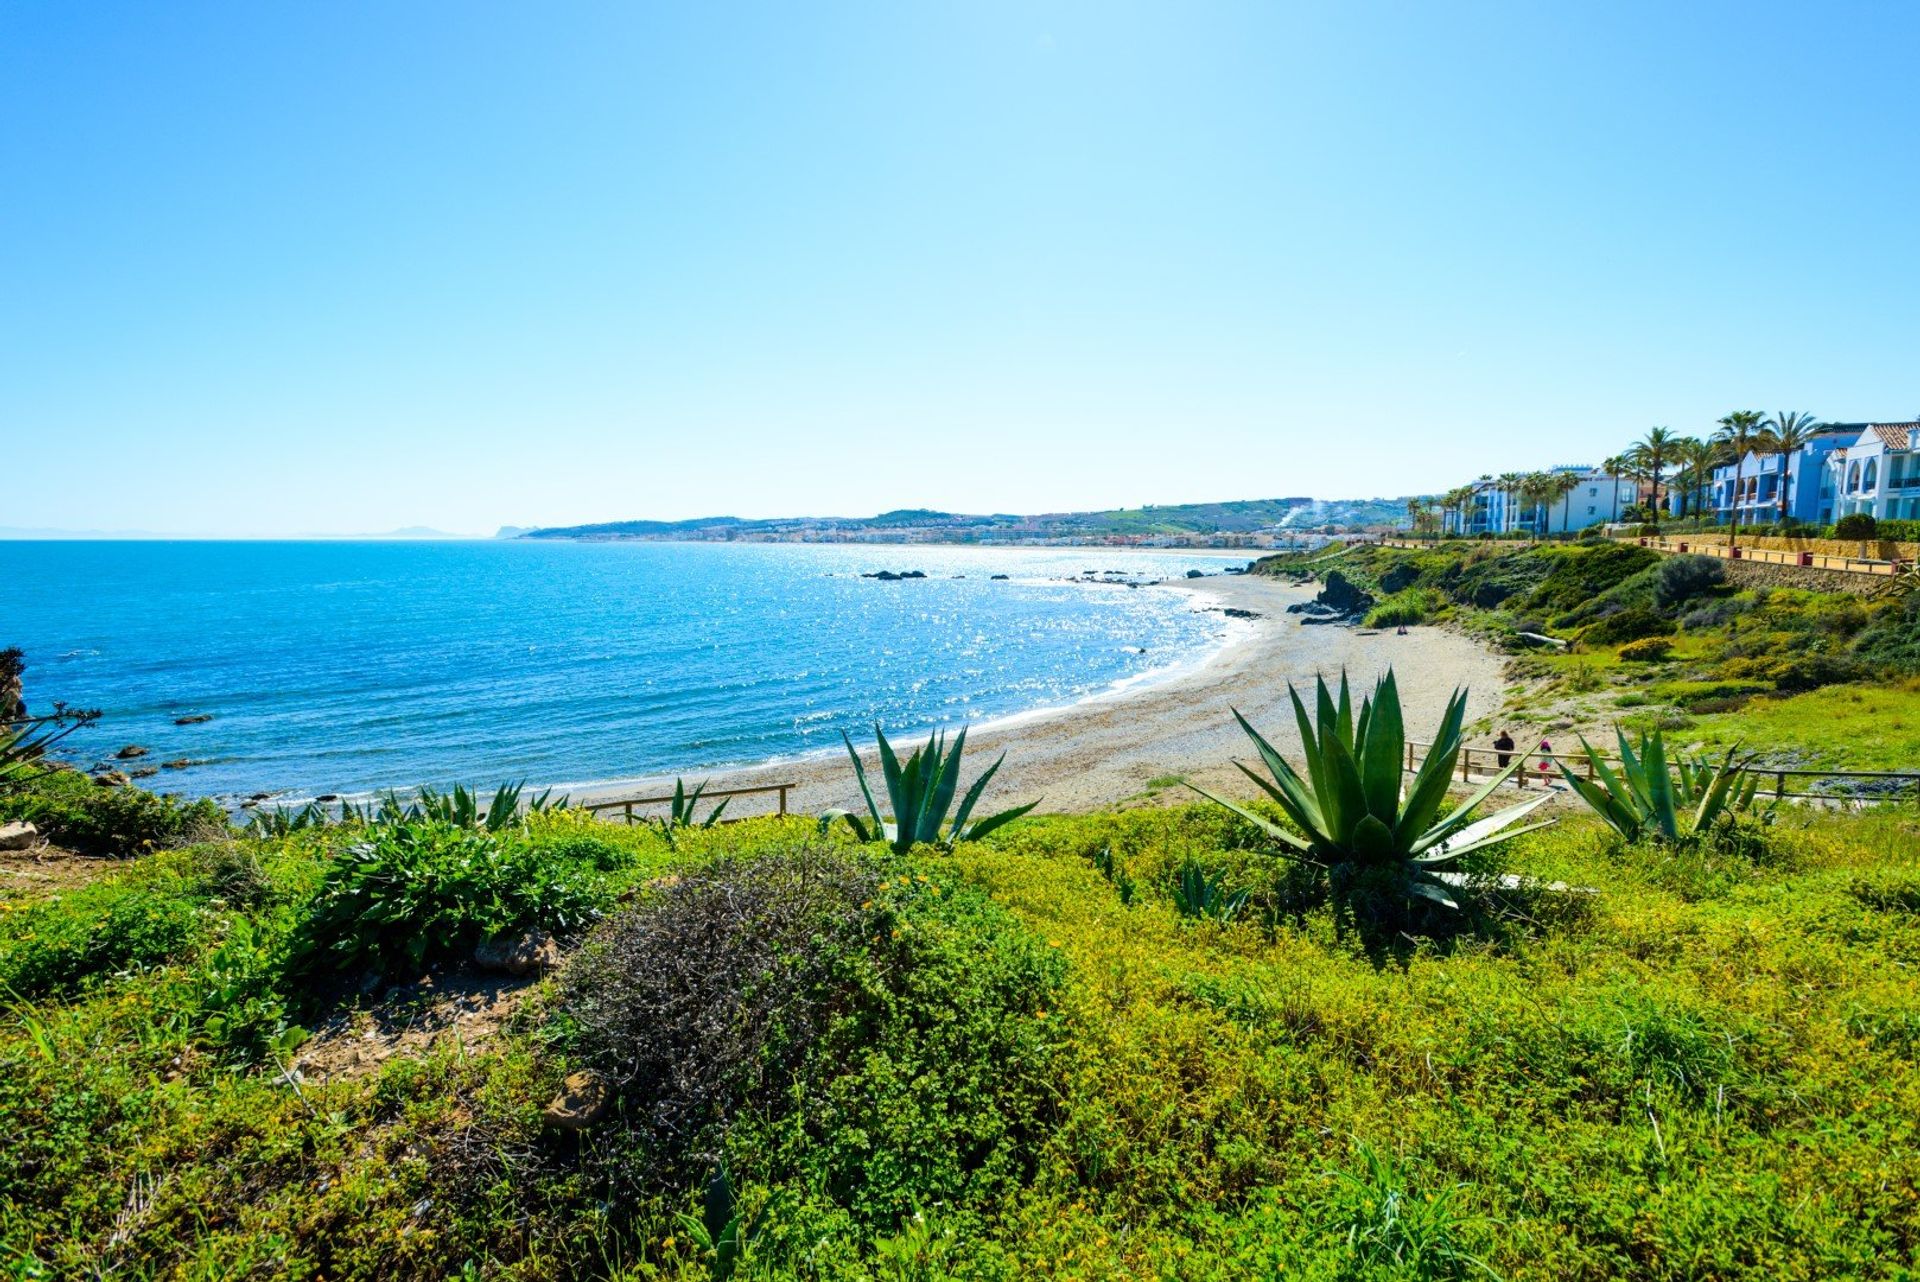 Revel in the lush green landscape on Playa Chica beach while enjoying views of the sparkling Mediterranean